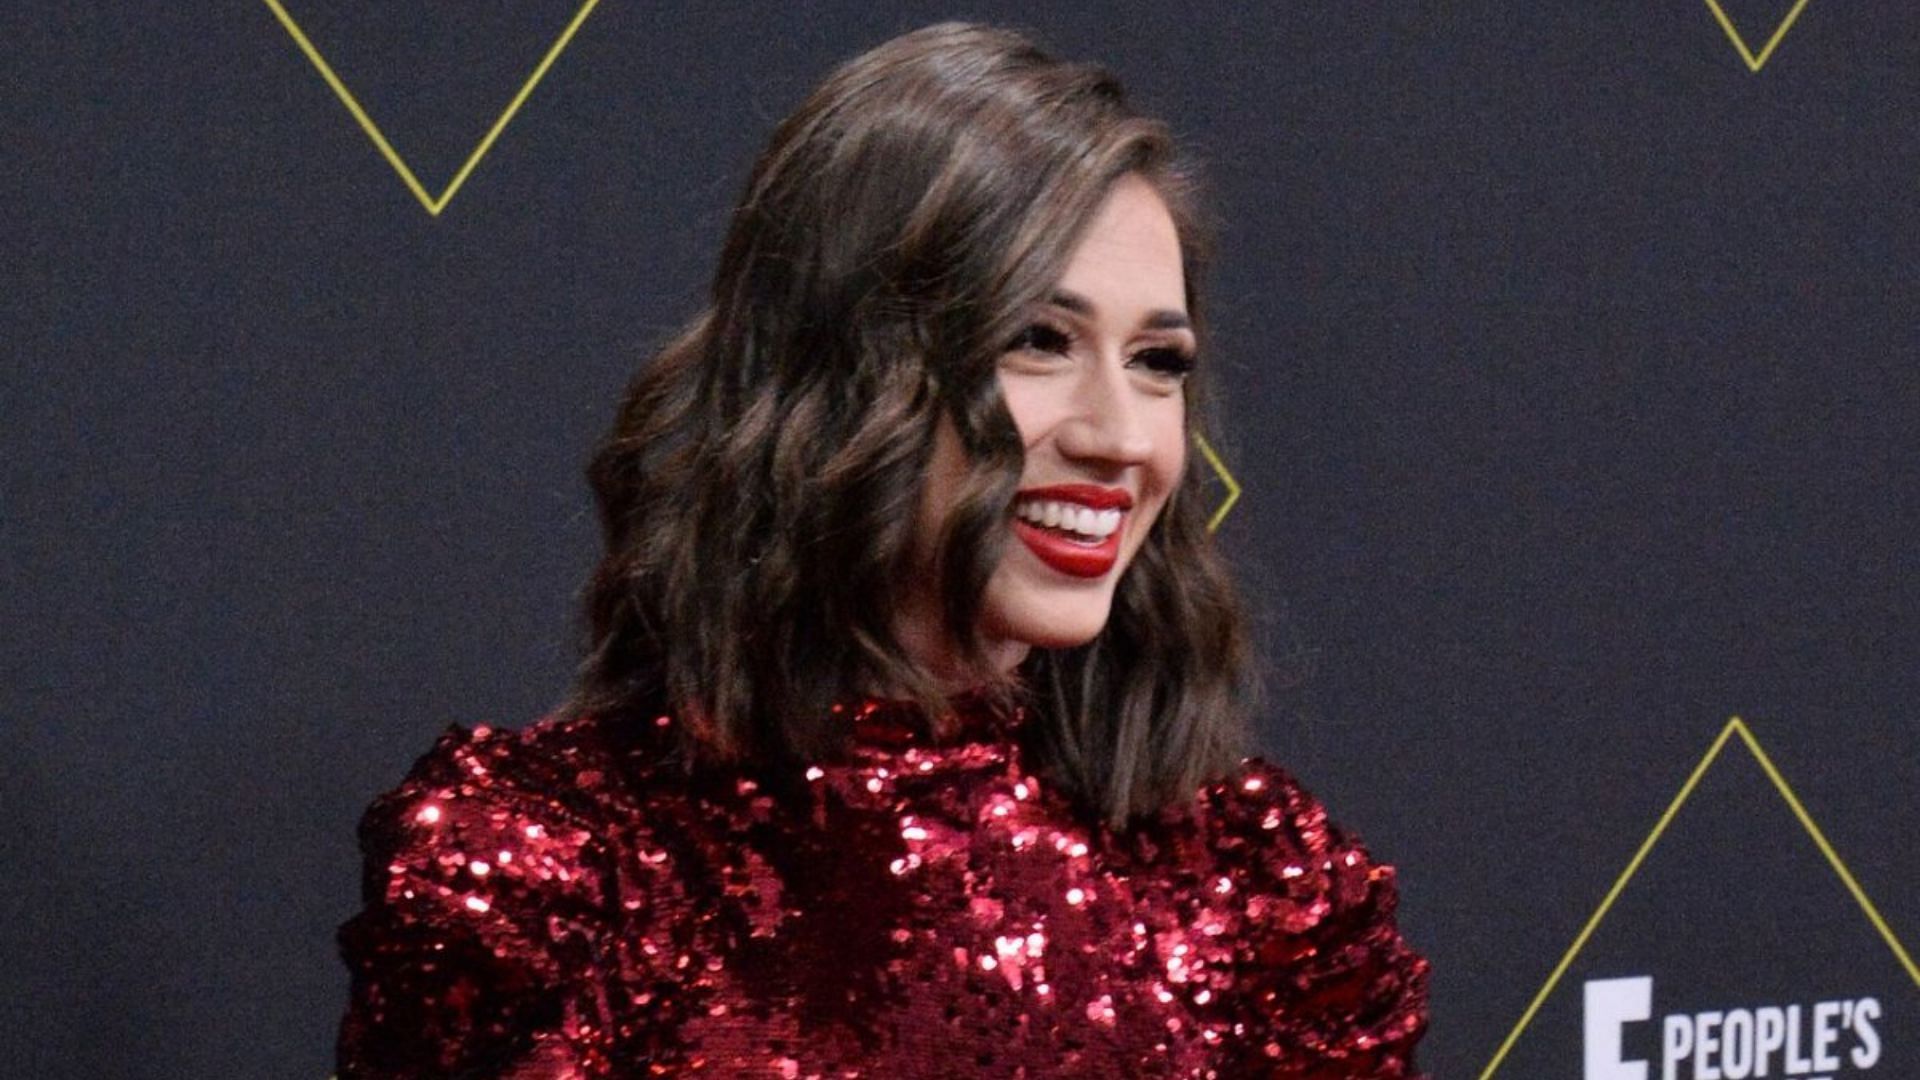 Colleen Ballinger gets blasted online after claiming copyright on infamous apology song (Image via Getty Images)